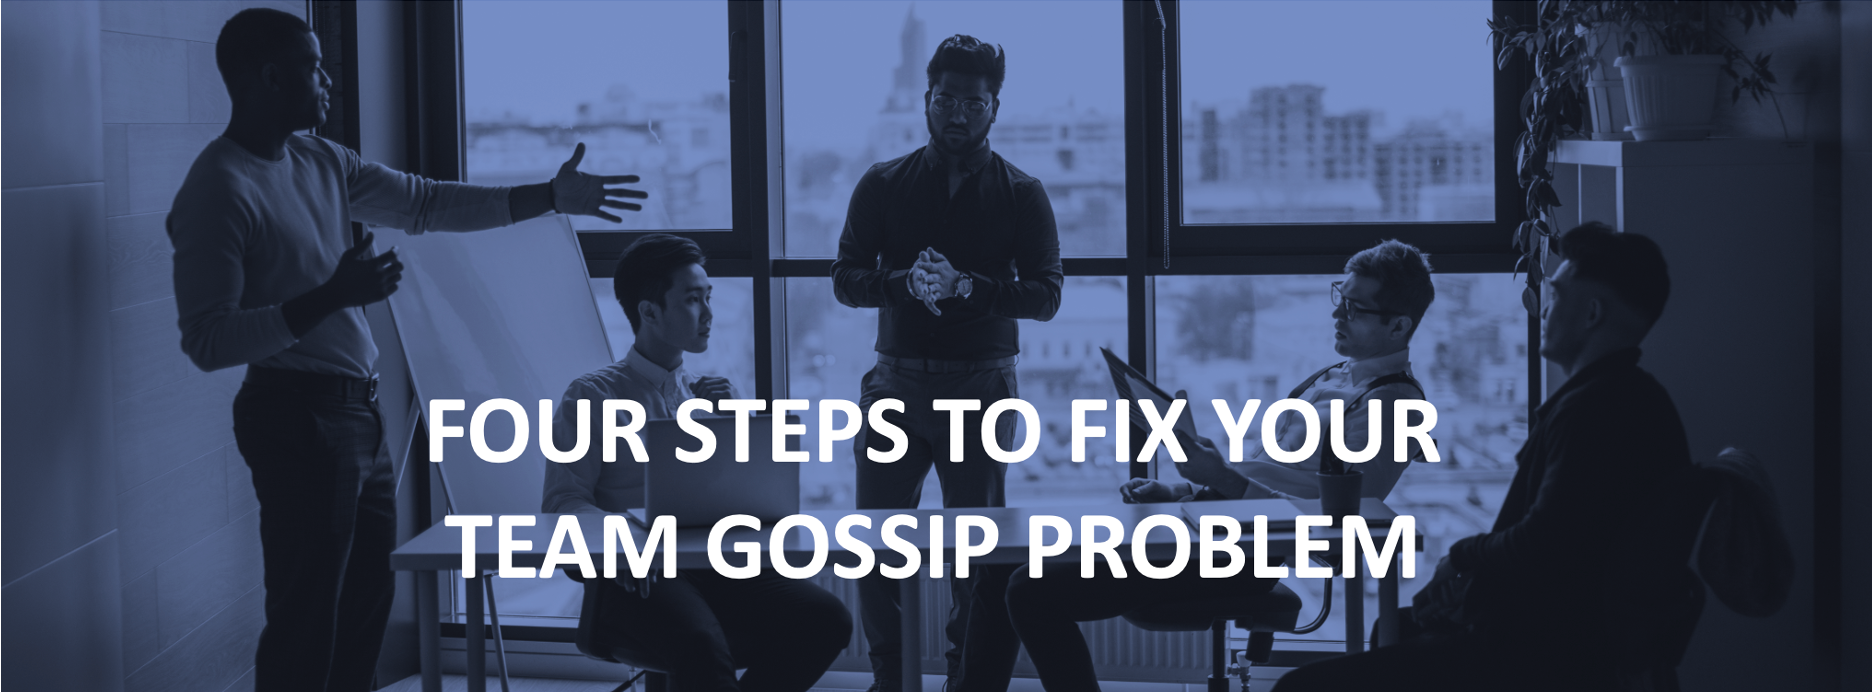 how to fix workplace gossip problem on your team